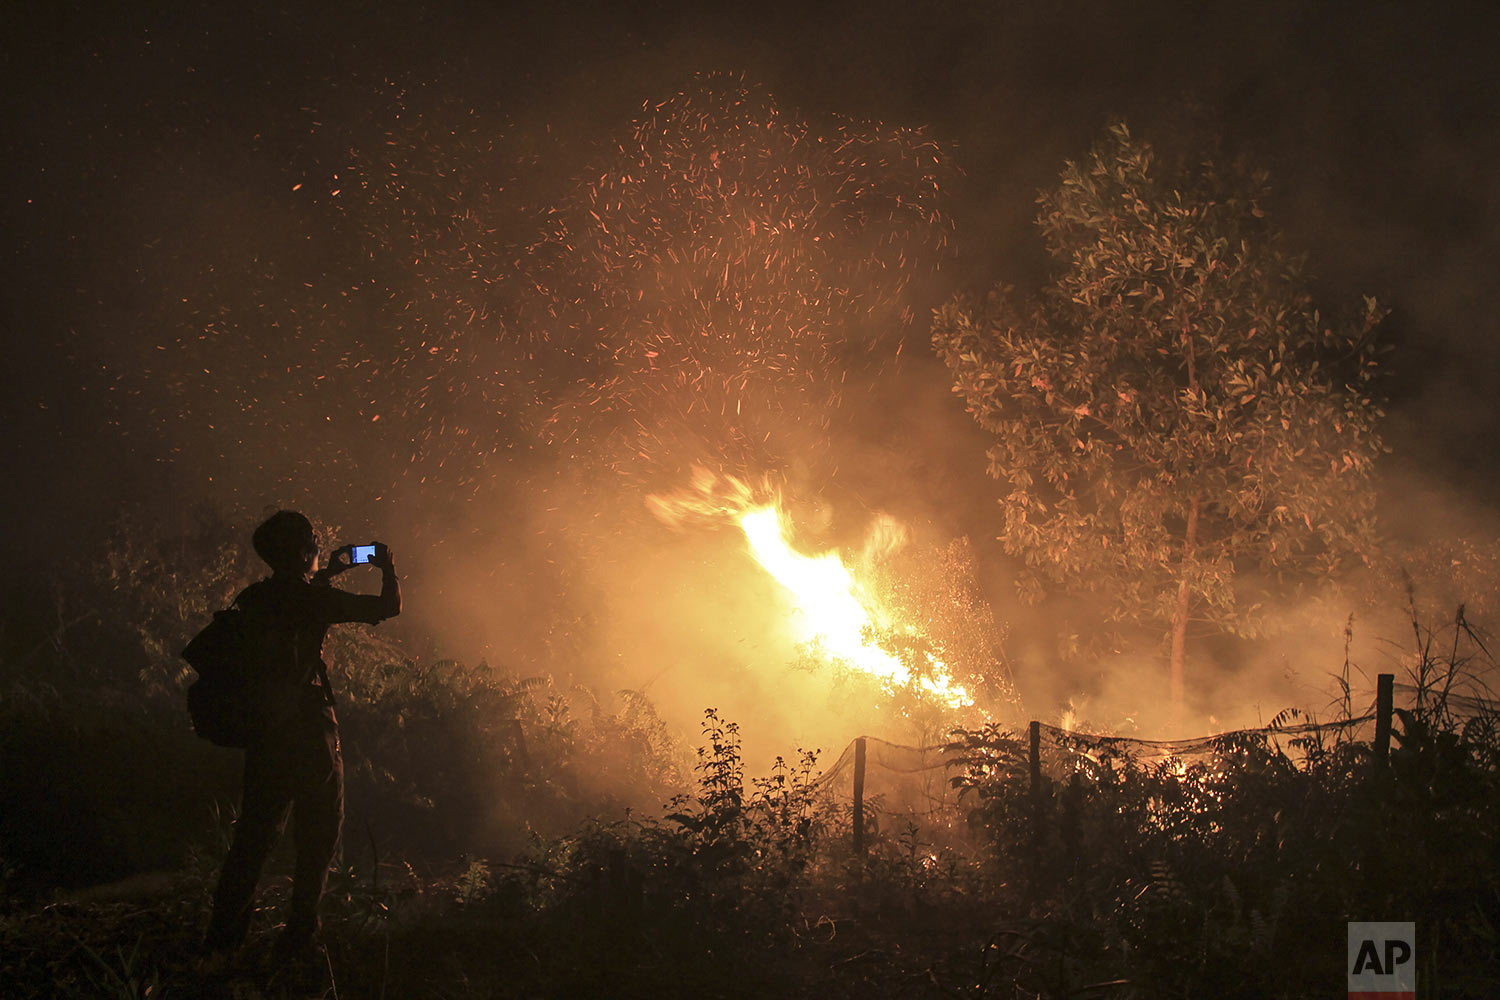  A man uses his mobile phone to take photos of a forest fire in Kampar, Riau province, Indonesia, Monday, Sept. 16, 2019. (AP Photo/Rafka Majjid) 